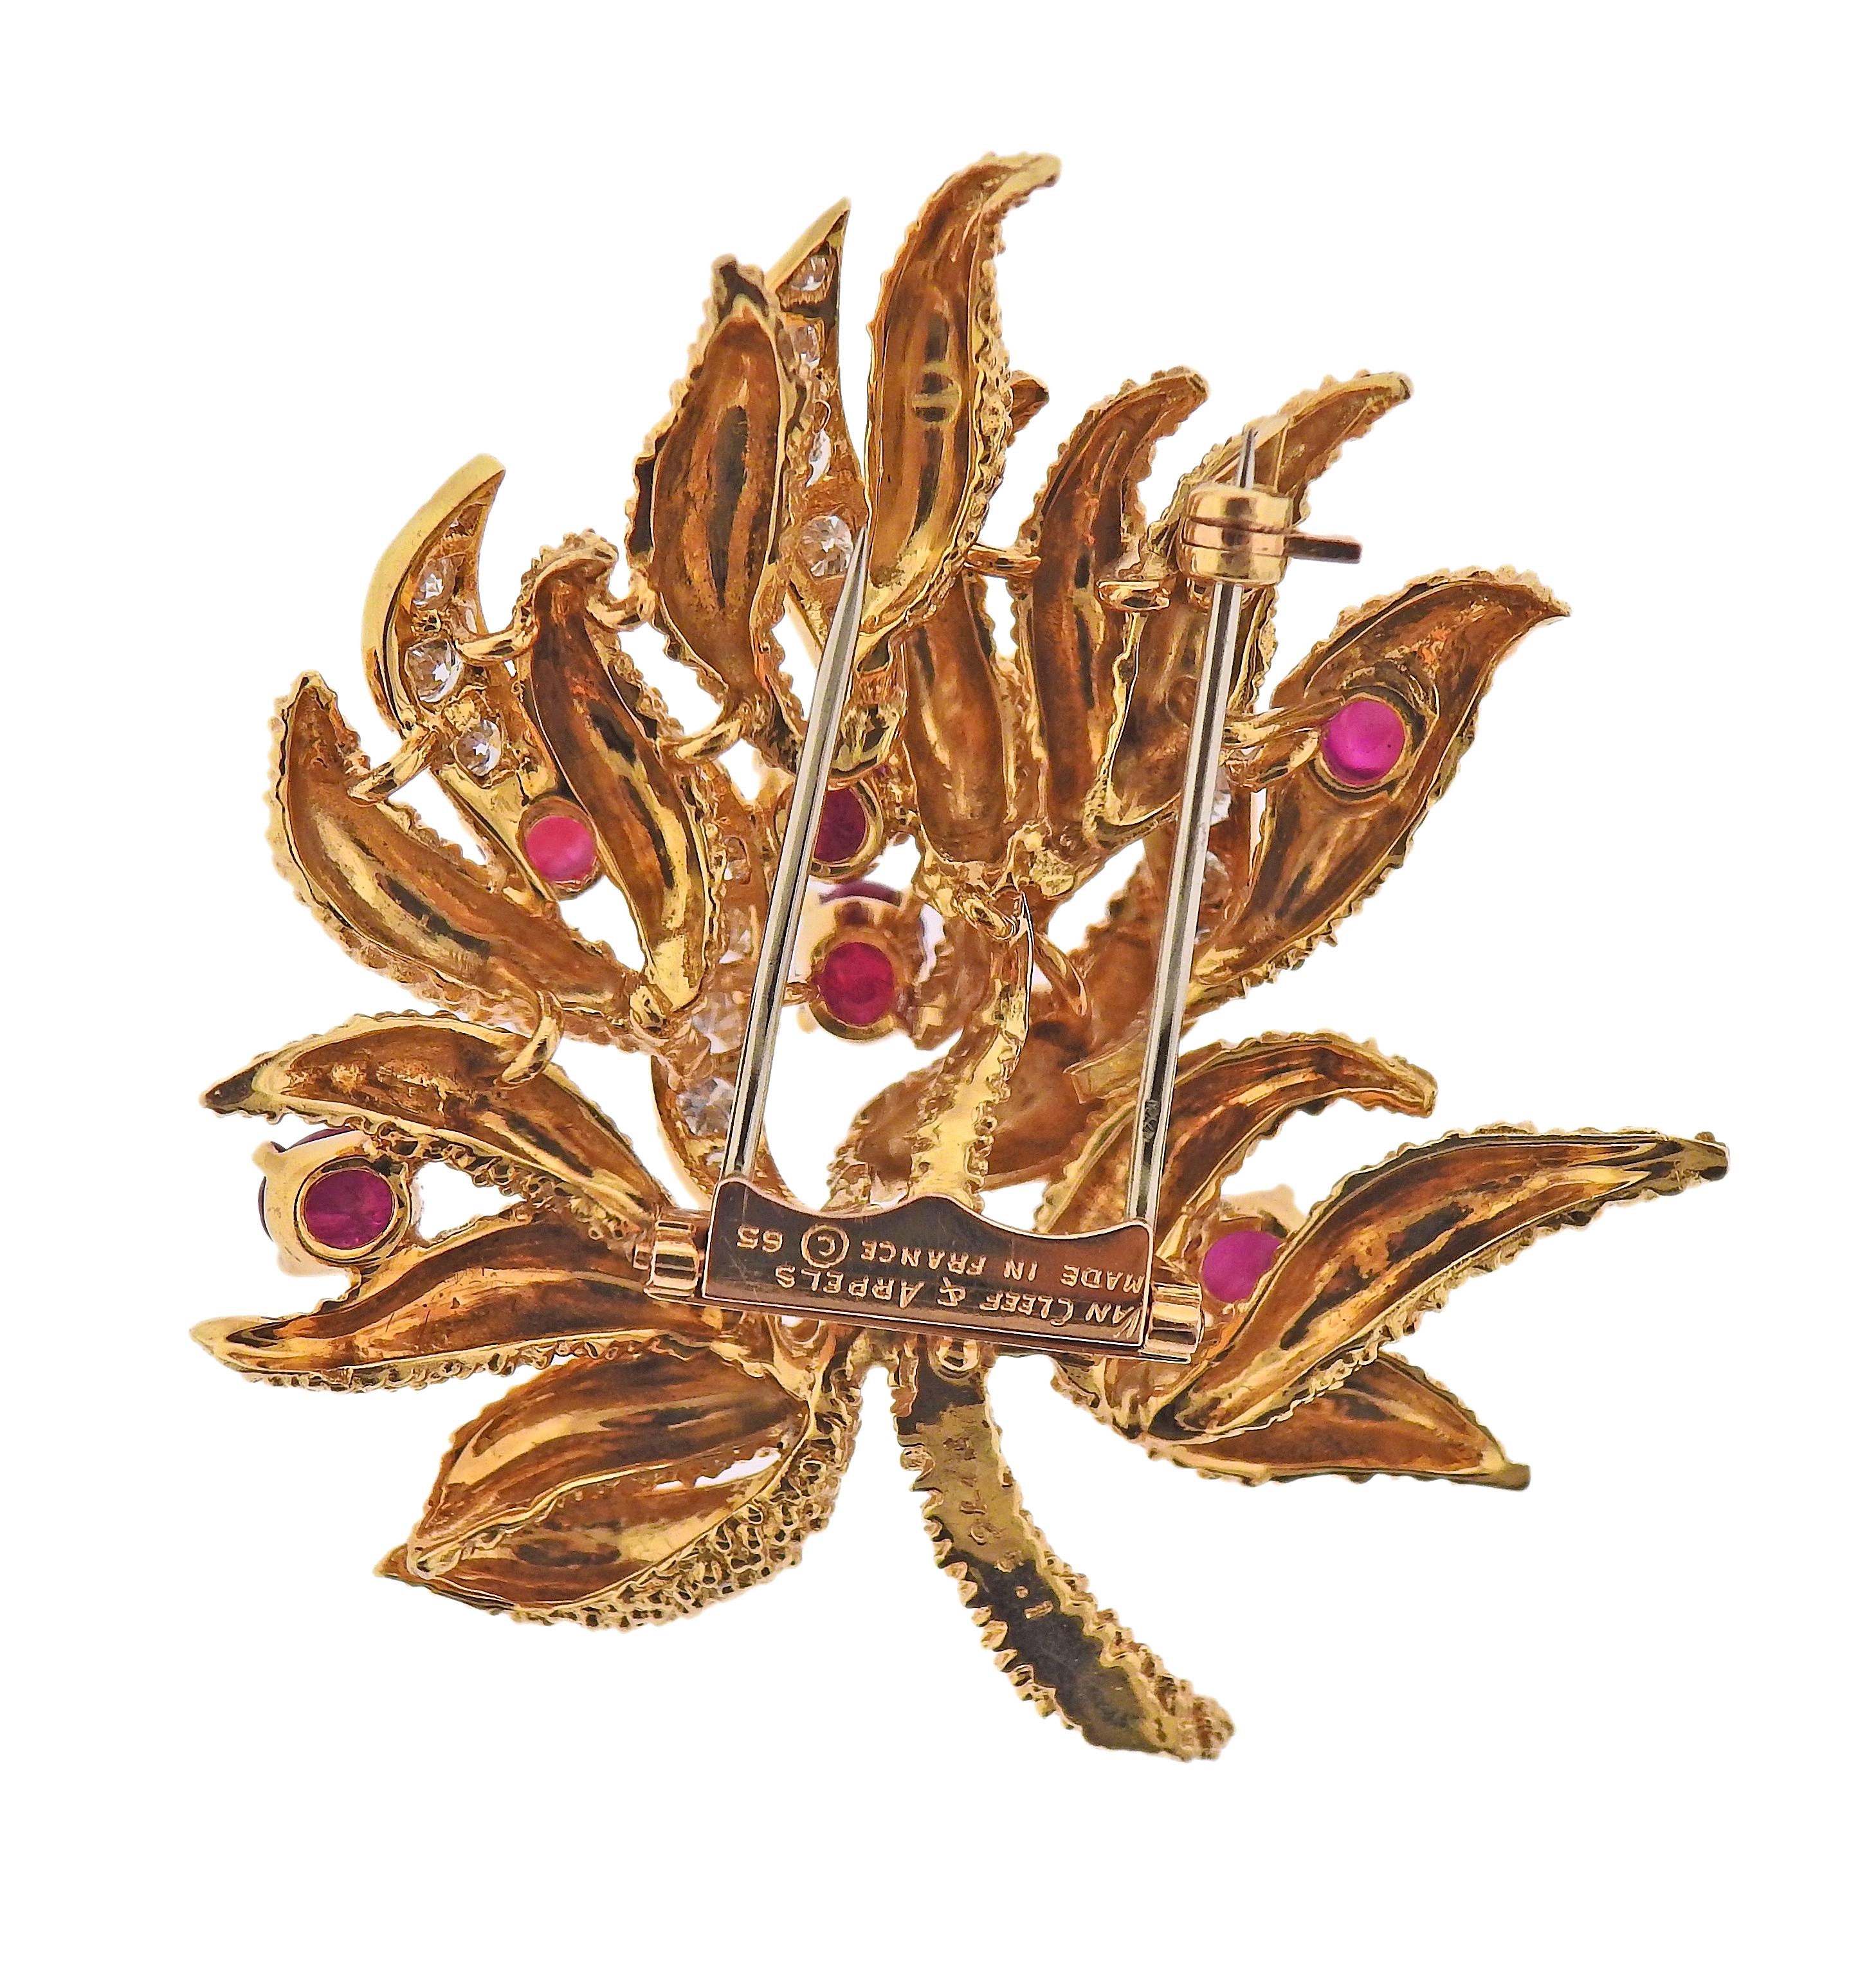 1960s vintage Van Cleef & Arpels, brooch in 18k gold, with ruby cabochons and approx. 1.00ctw in diamonds. Brooch is 1 7/8